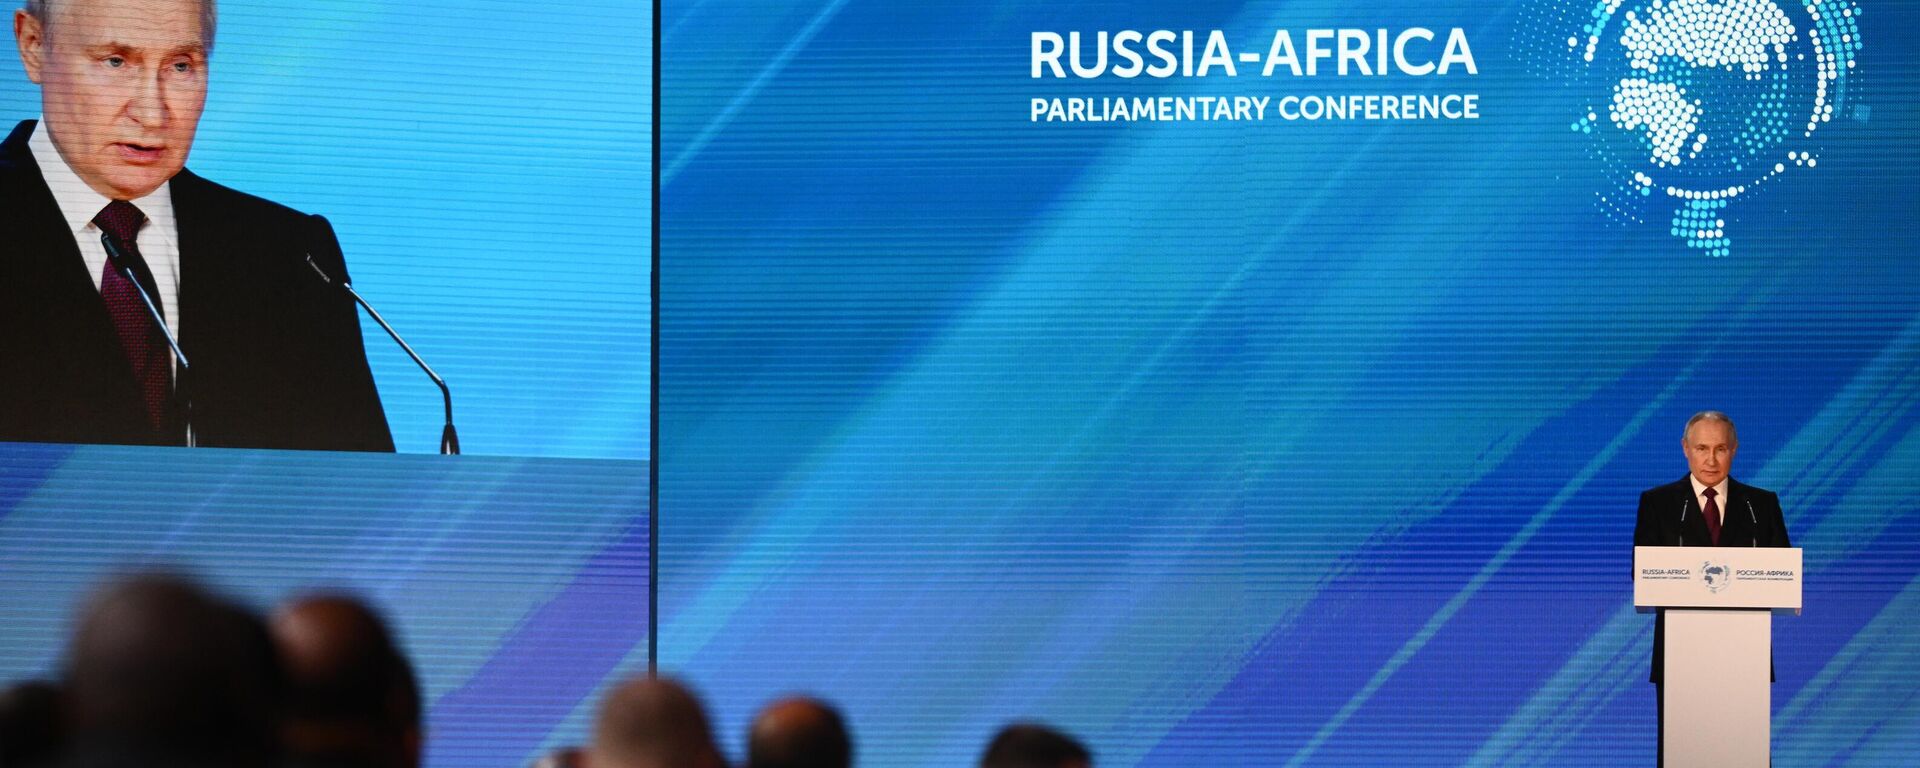 March 20, 2023. Russian President Vladimir Putin speaks at the international parliamentary conference Russia - Africa in a multipolar world. - Sputnik Africa, 1920, 20.03.2023